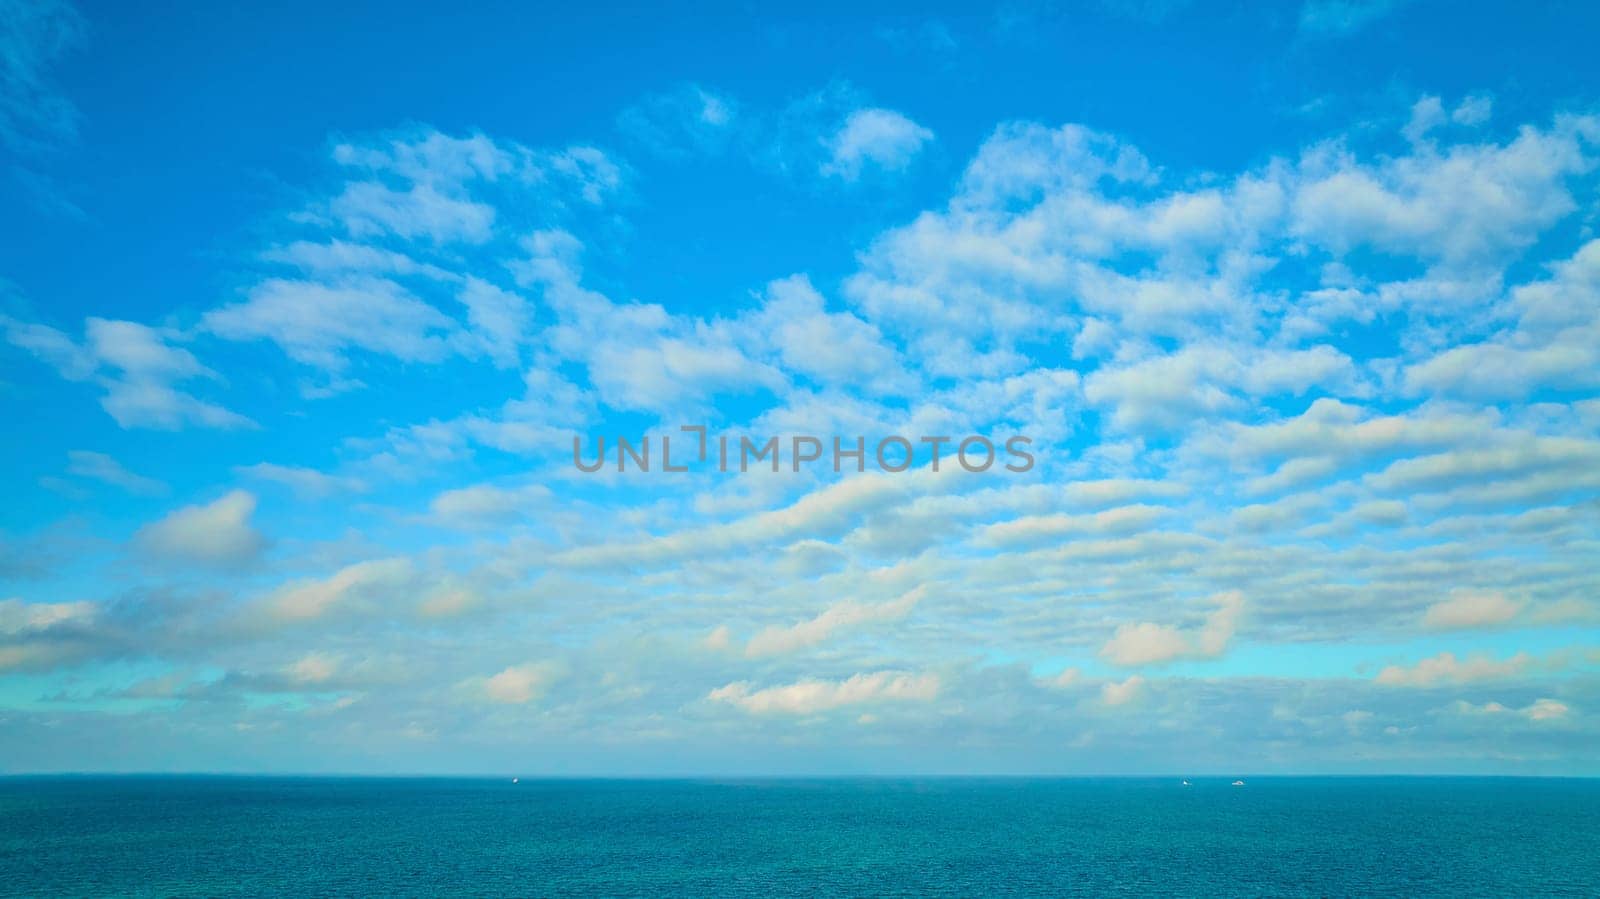 Image of Blue sky with wispy white clouds, dream and inspiration over blue Lake Michigan water, inspire